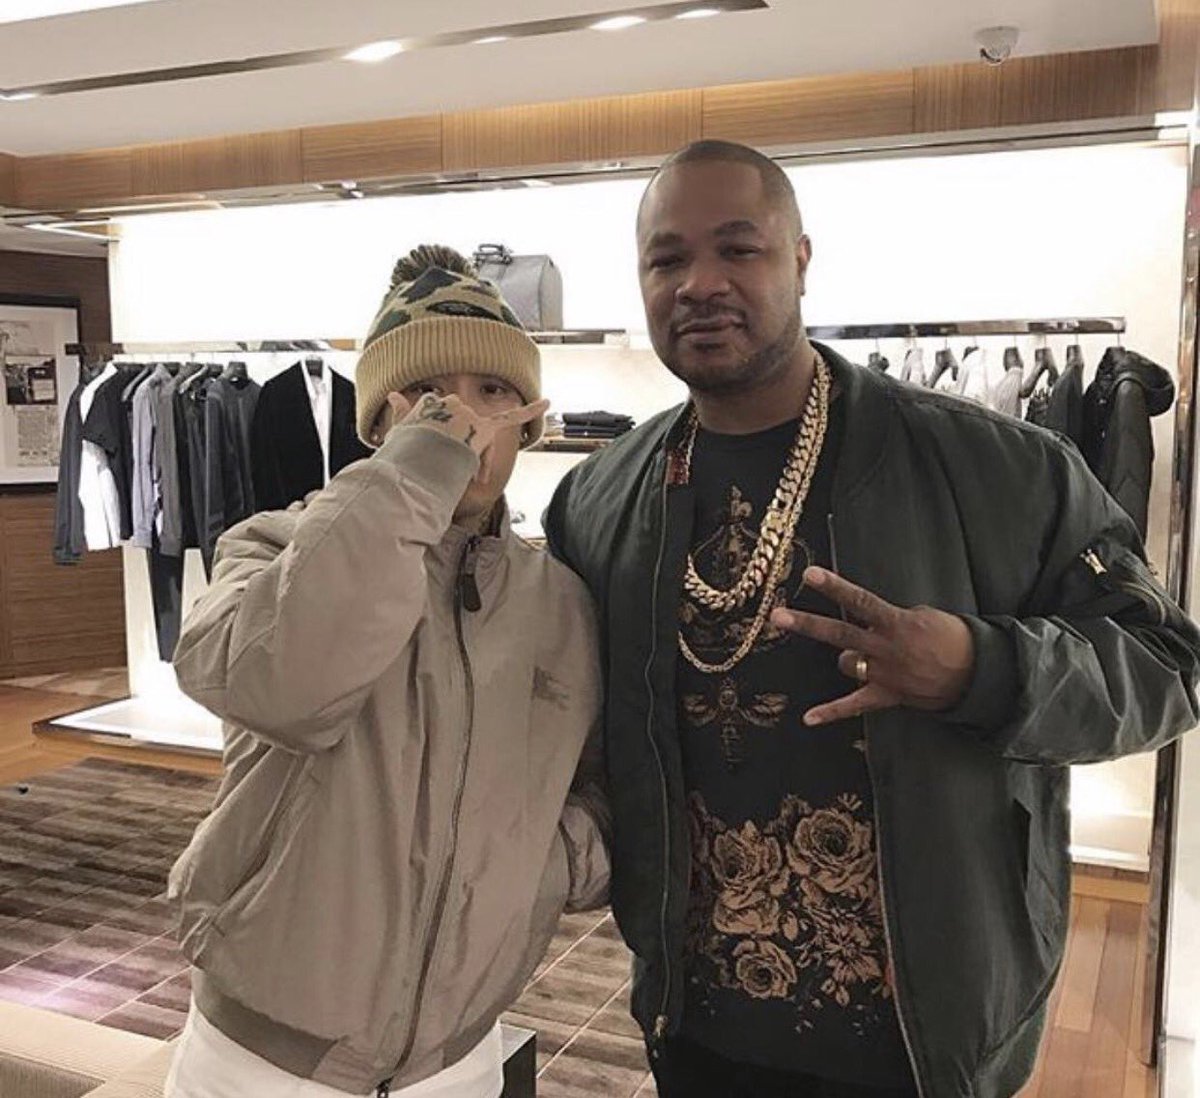 RT @HiphopKR: First with Mike Tyson
Now with @xzibit ! ???? https://t.co/s4y5Qc4bgn